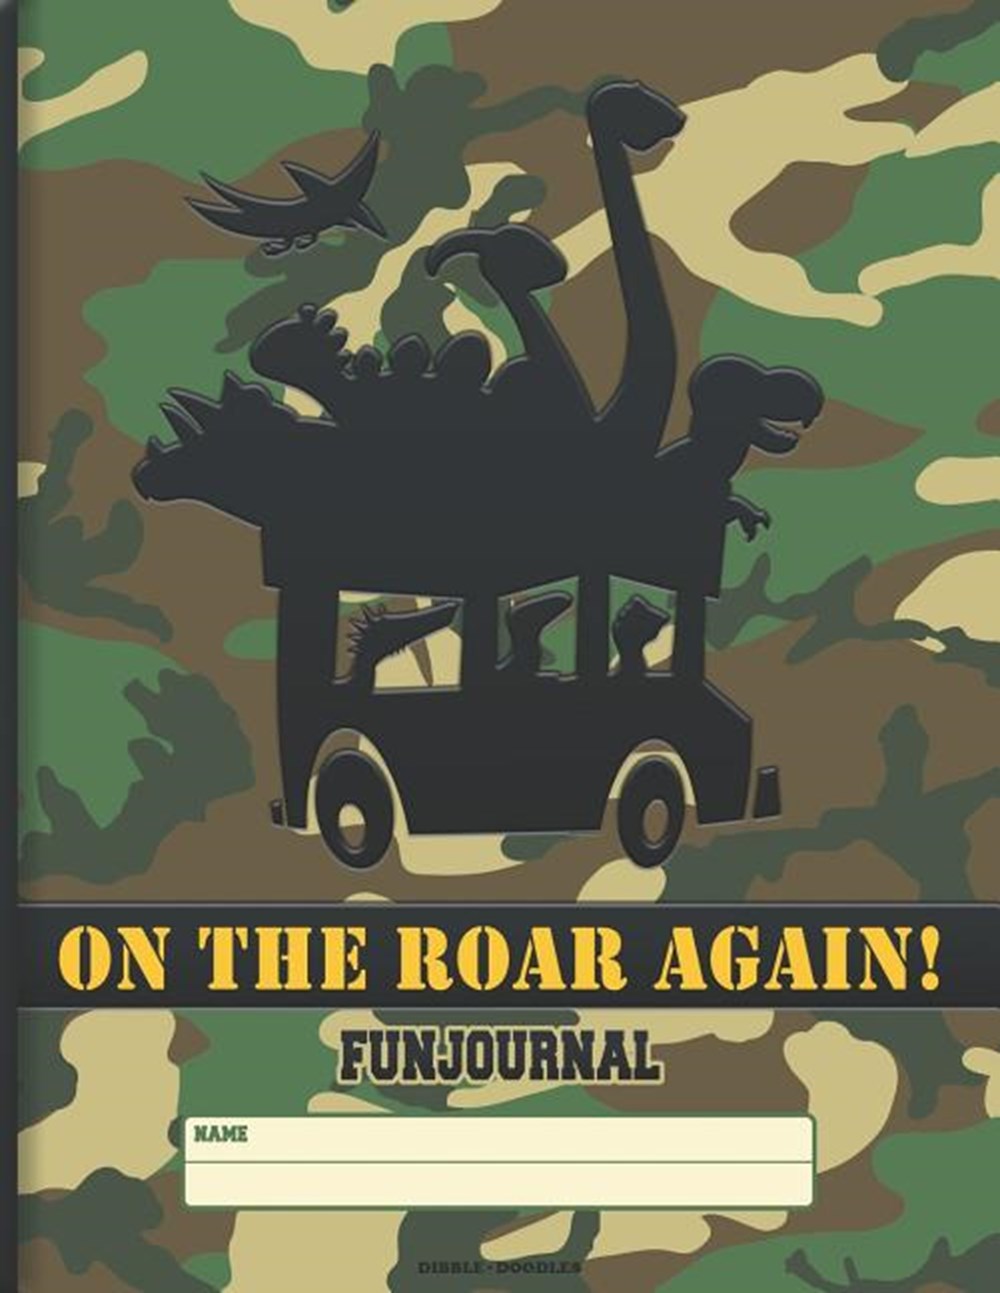 On the ROAR Again!: FUN - JOURNAL to DRAW, SKETCH, AND WRITE